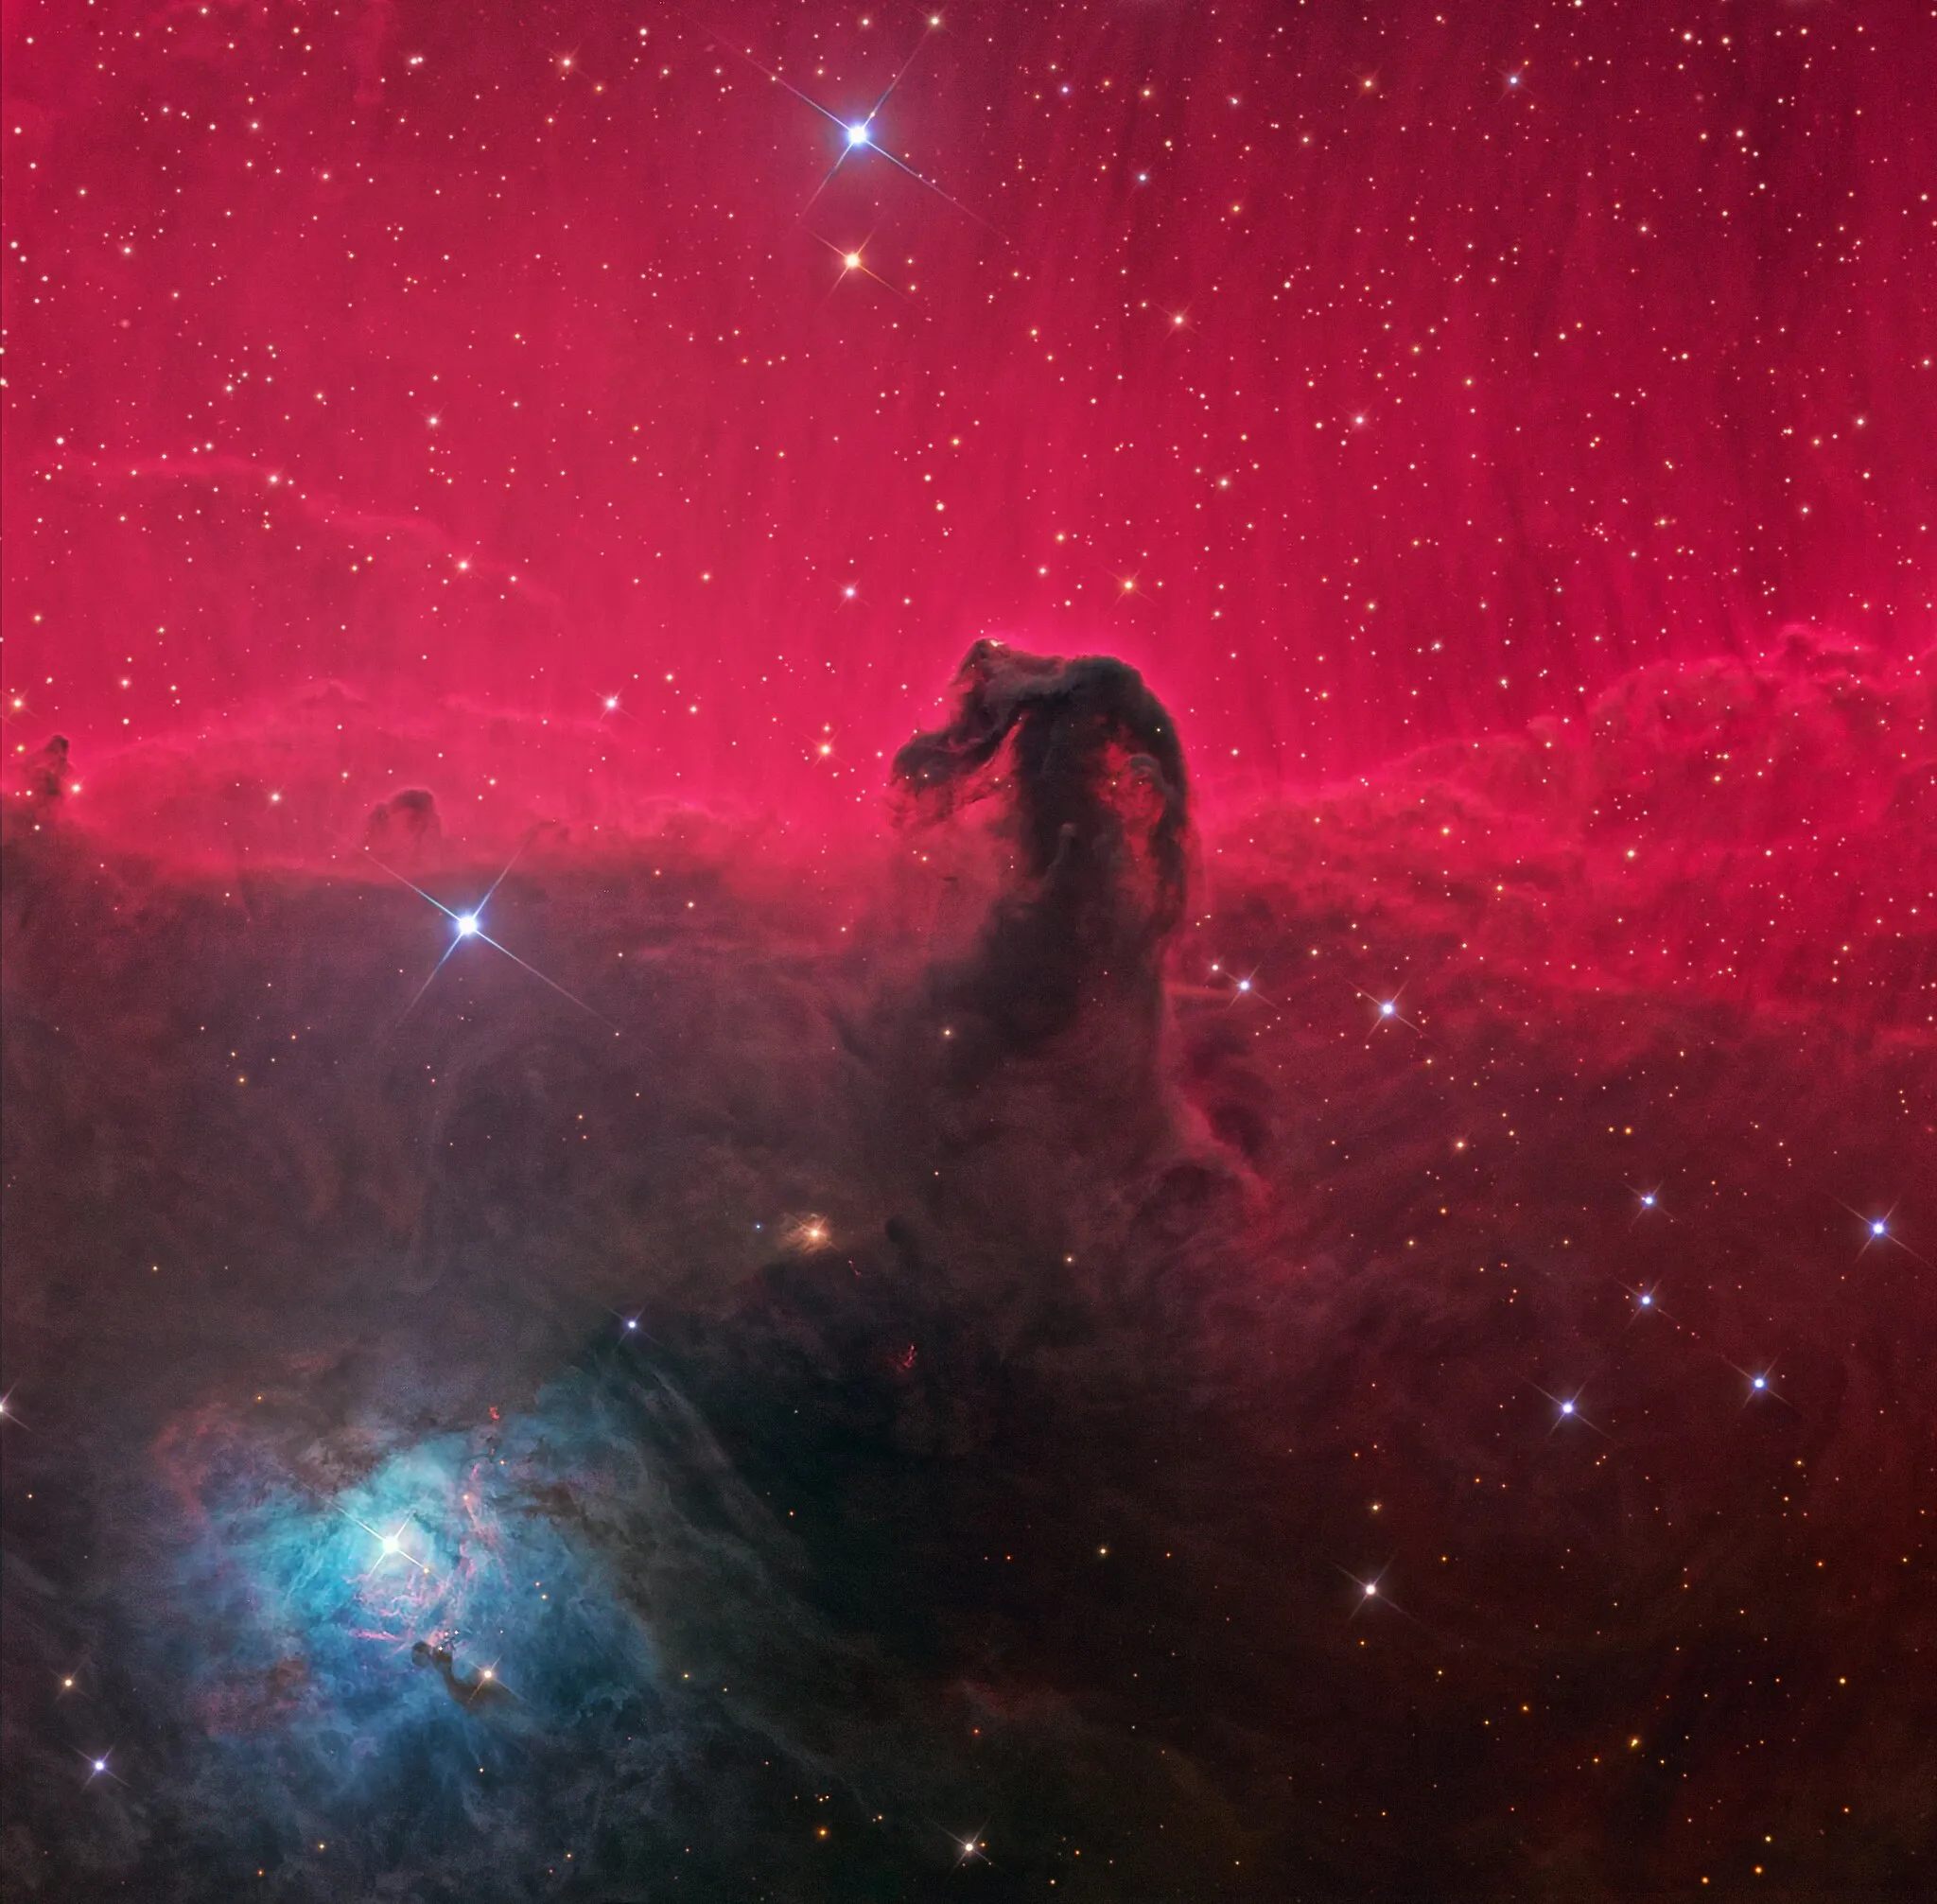 Photo showing: Horsehead Nebula (also known as Barnard 33 in emission nebula IC 434) is a dark nebula in the constellation Orion.
The image is a frame mosaic taken with 5 different filters, standard Red – Green – Blue with details enhanced with narrowband data of Hydrogen-alpha (Hα) and O III. The Hα was color-mapped to red and the O III to teal. So it is a representative color image consisting of over 900 minutes of exposure time.